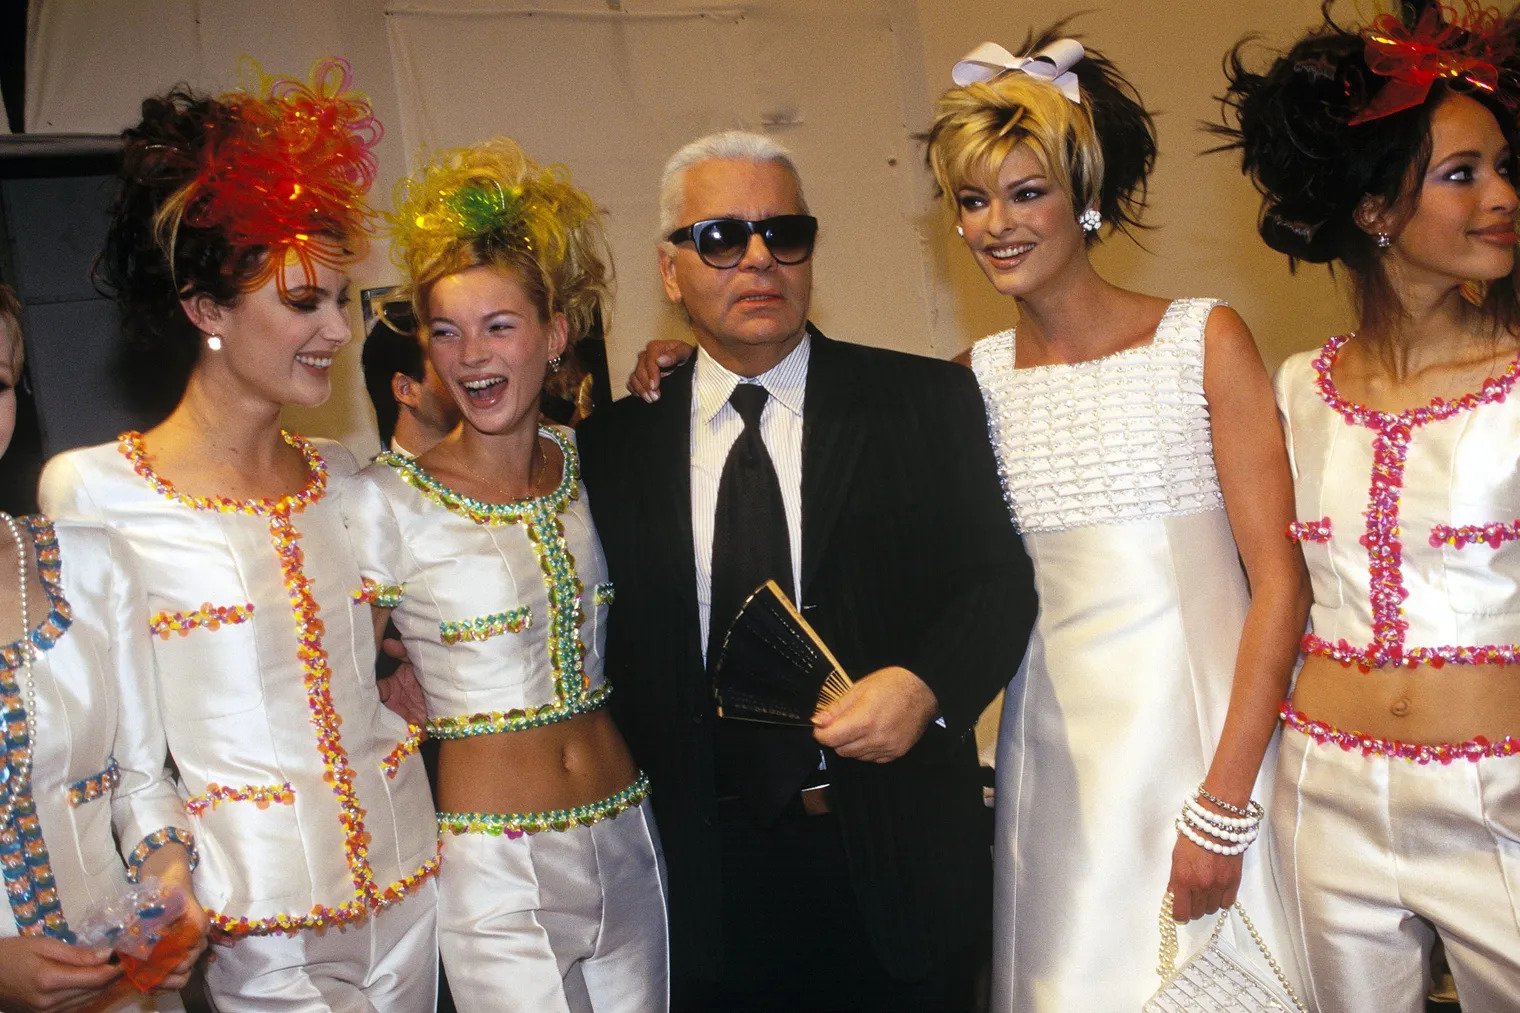 Karl lagerfeld with models